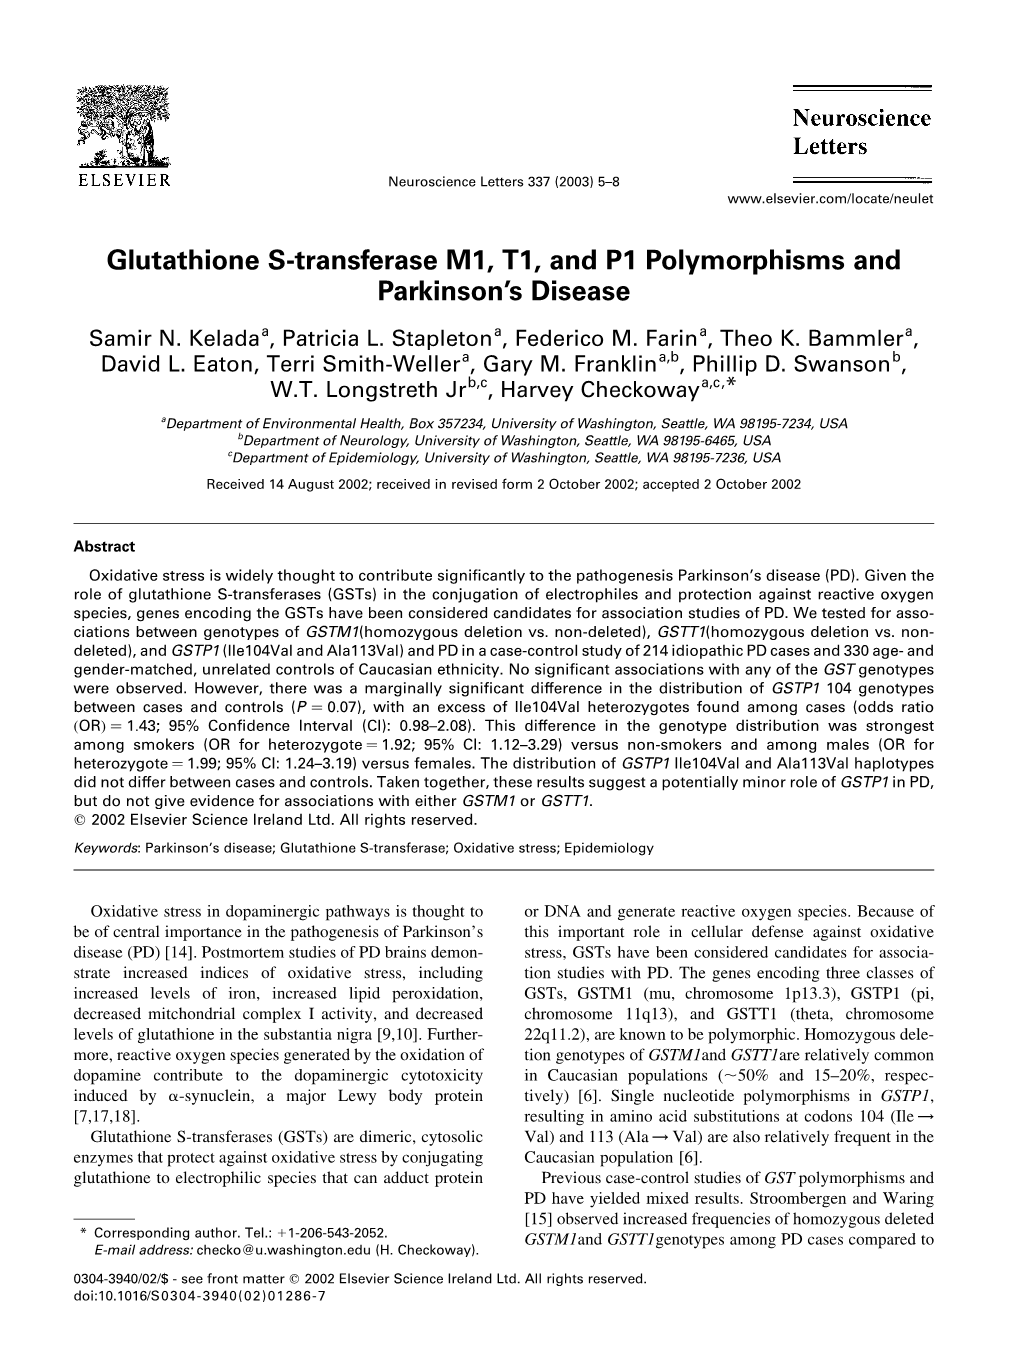 Glutathione S-Transferase M1, T1, and P1 Polymorphisms and Parkinson's Disease